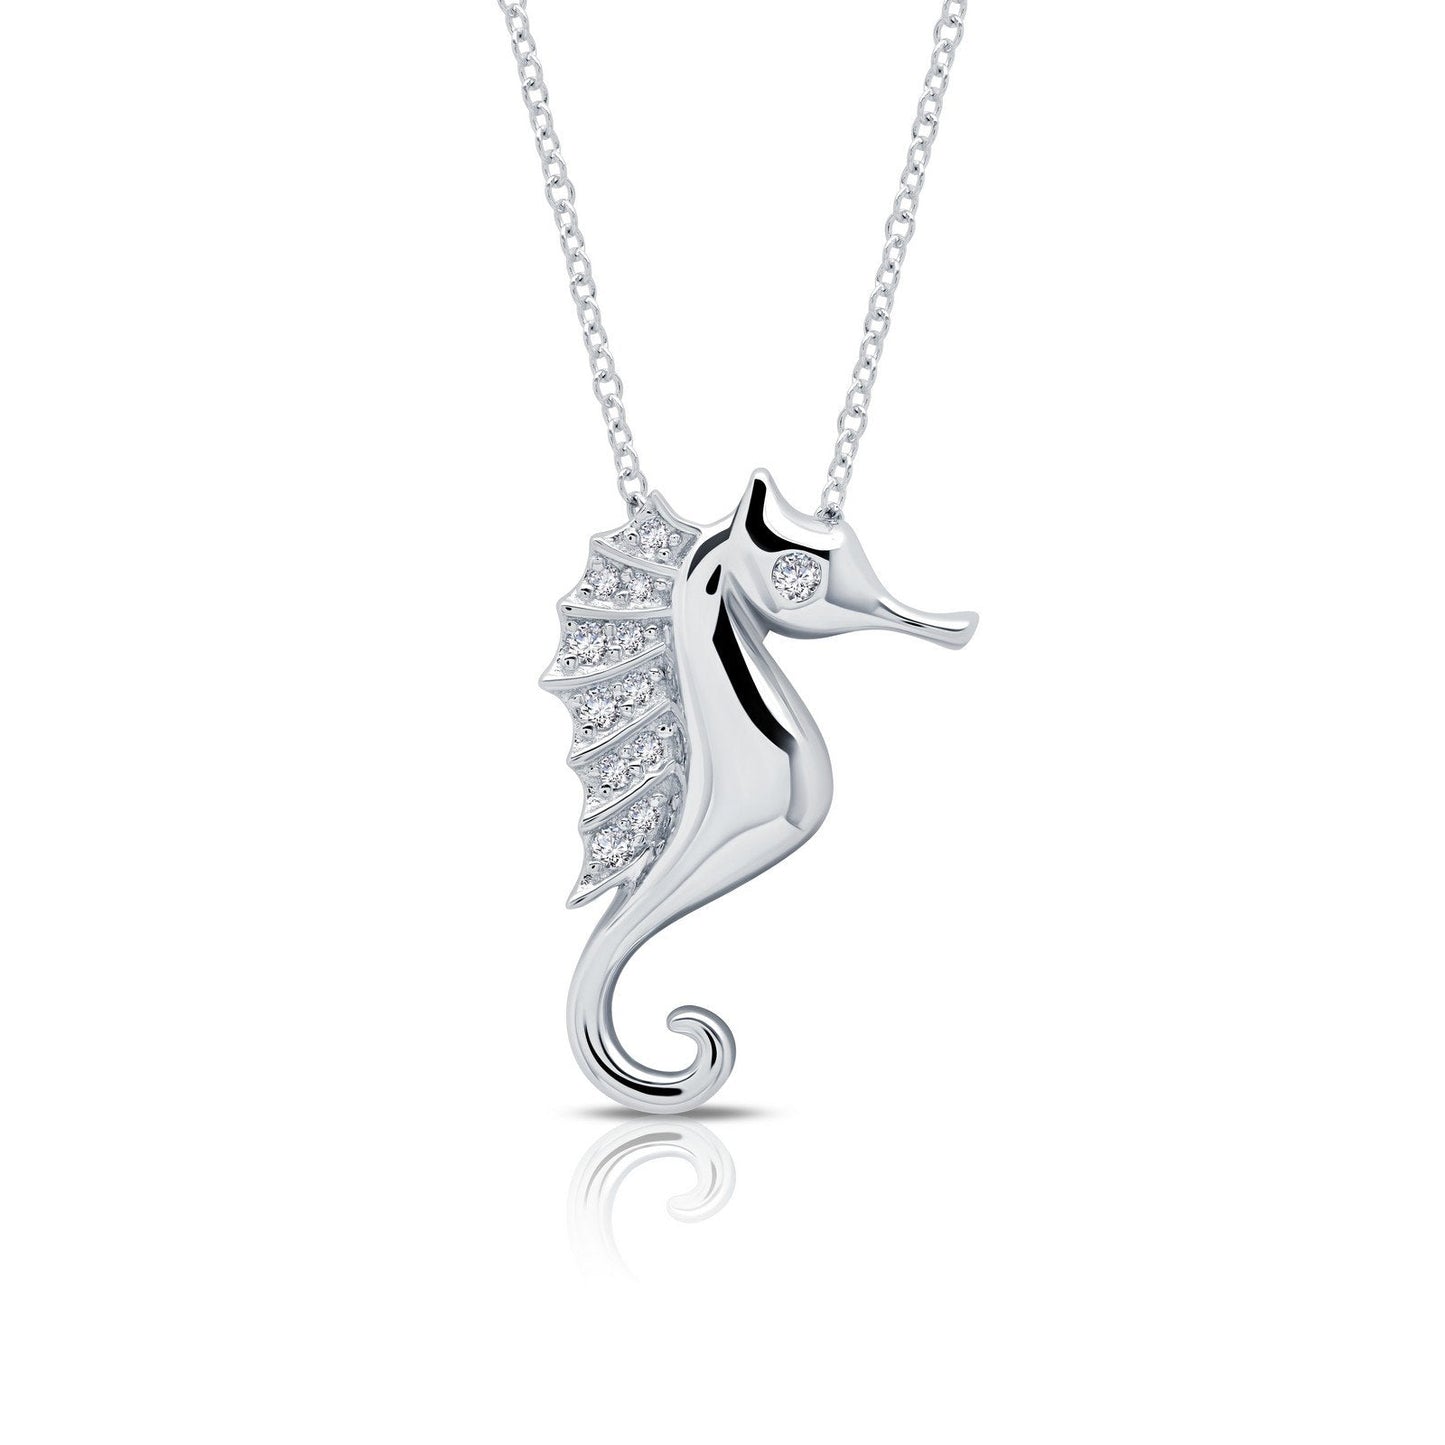 Load image into Gallery viewer, Lafonn Whimsical Seahorse Necklace Simulated Diamond NECKLACES Platinum 0.37 CTS Approx. 19.2mm (H) x 11mm (W)
